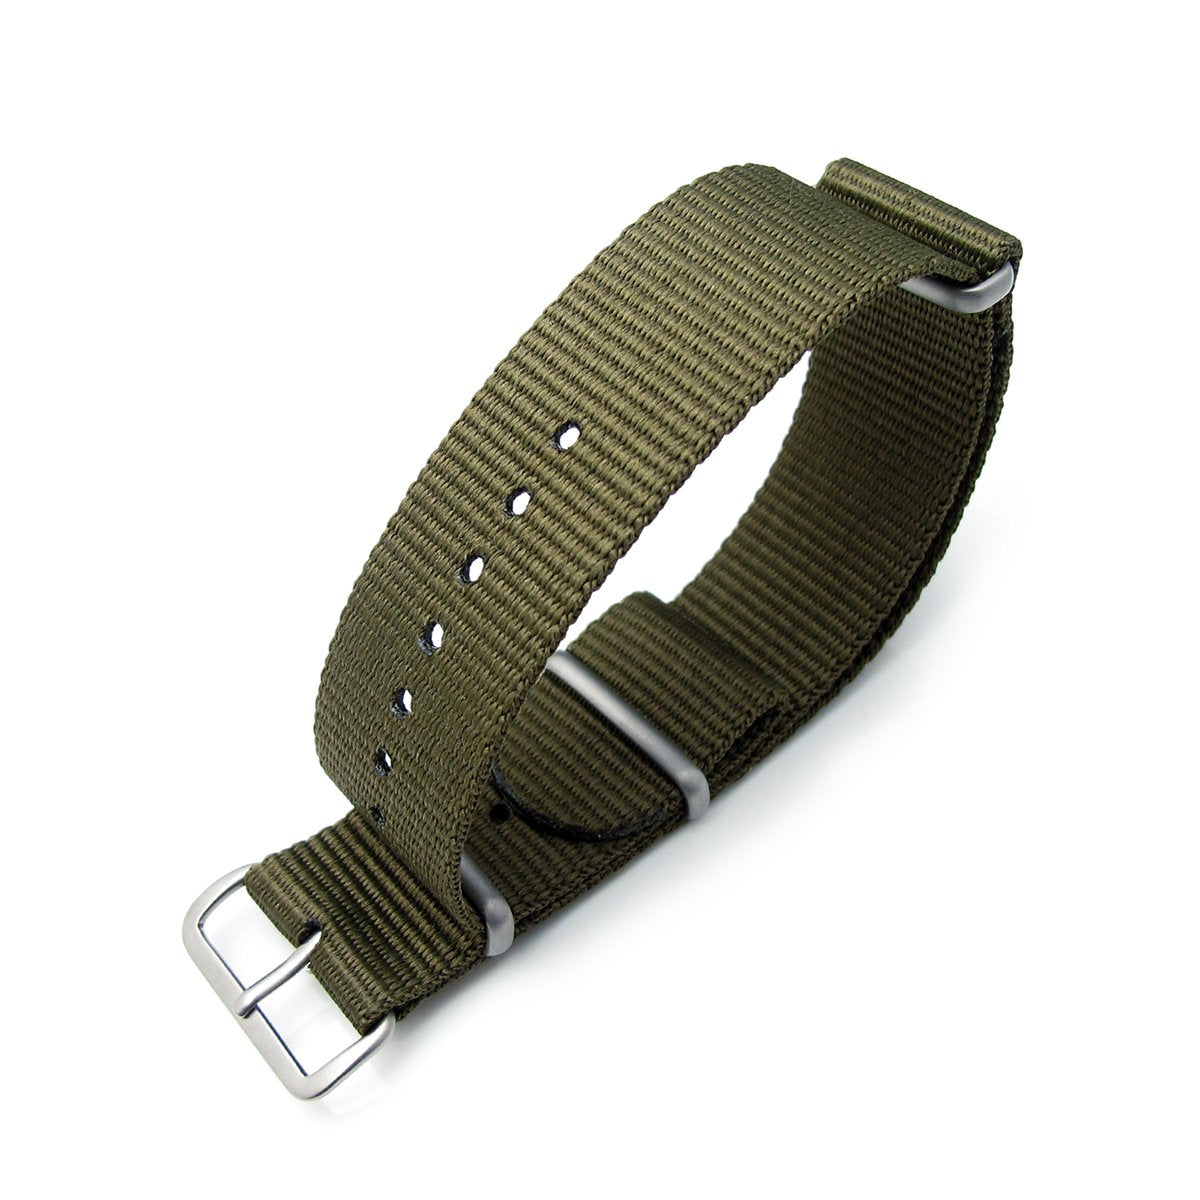 MiLTAT 22mm G10 military watch strap ballistic nylon armband Brushed Military Green Strapcode Watch Bands